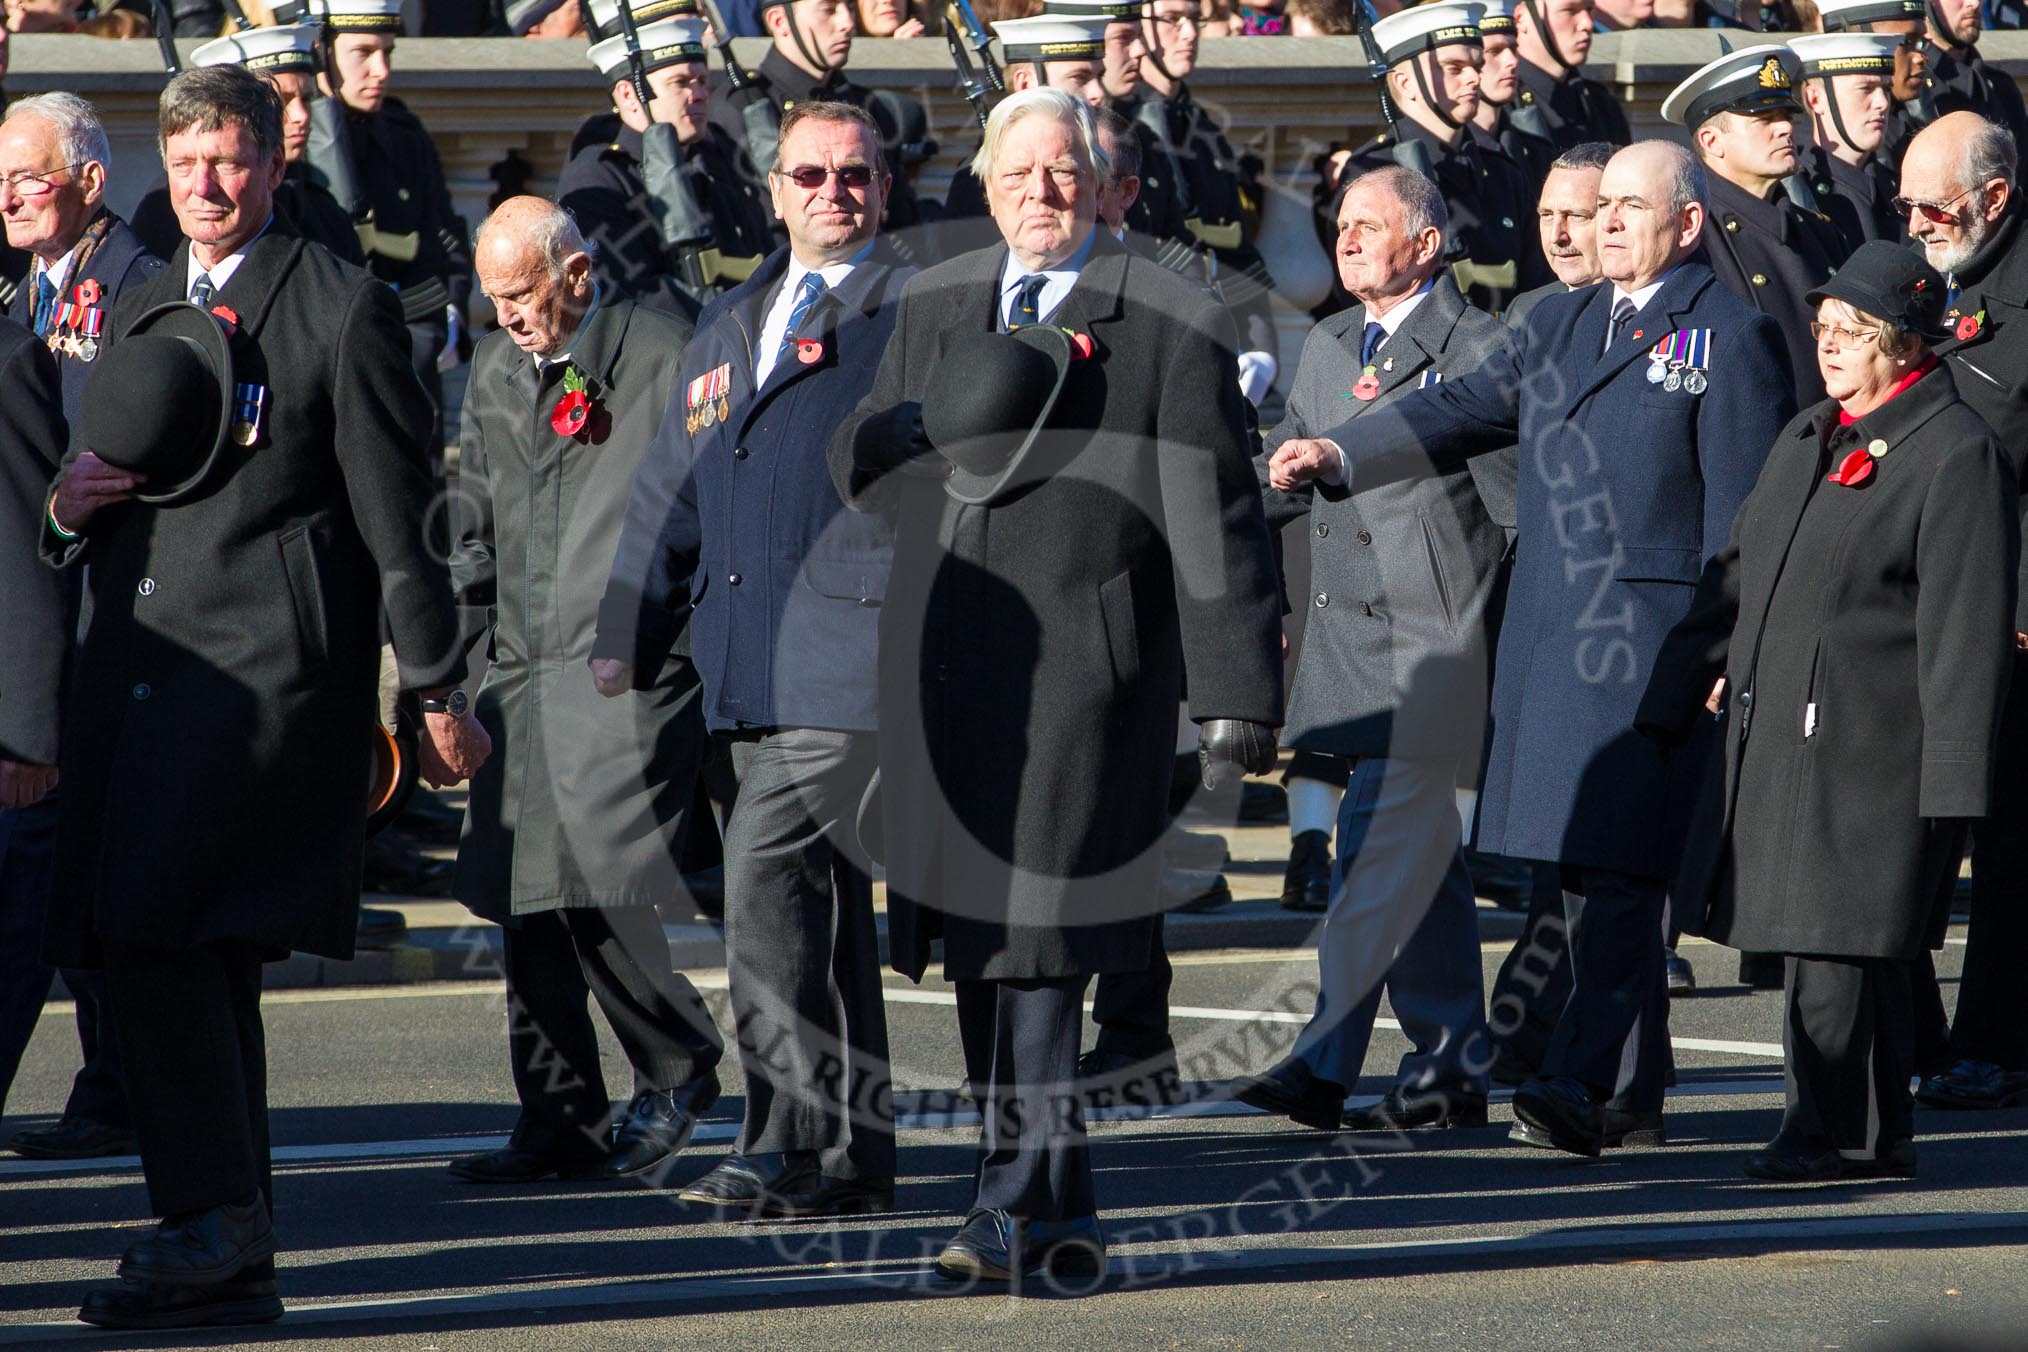 Remembrance Sunday 2012 Cenotaph March Past: Group E13 - Fleet Air Arm Officers Association..
Whitehall, Cenotaph,
London SW1,

United Kingdom,
on 11 November 2012 at 11:40, image #112